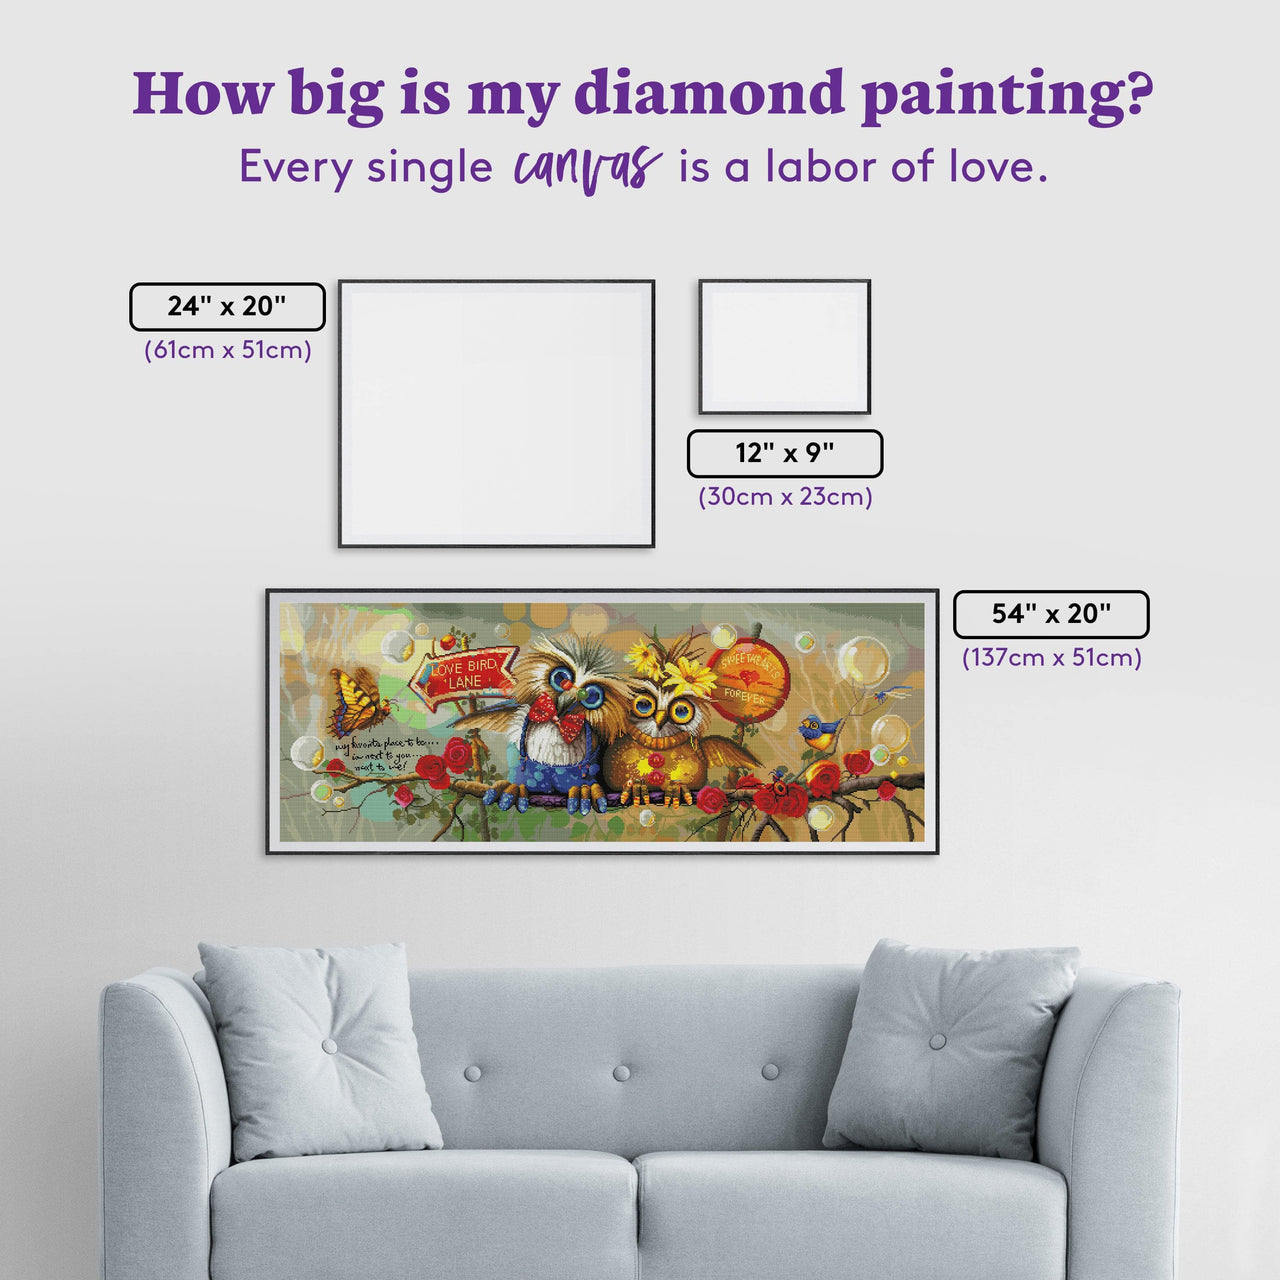 Diamond Painting Next To You 54" x 20" (137cm x 51cm) / Square with 64 Colors including 5 ABs / 109,143